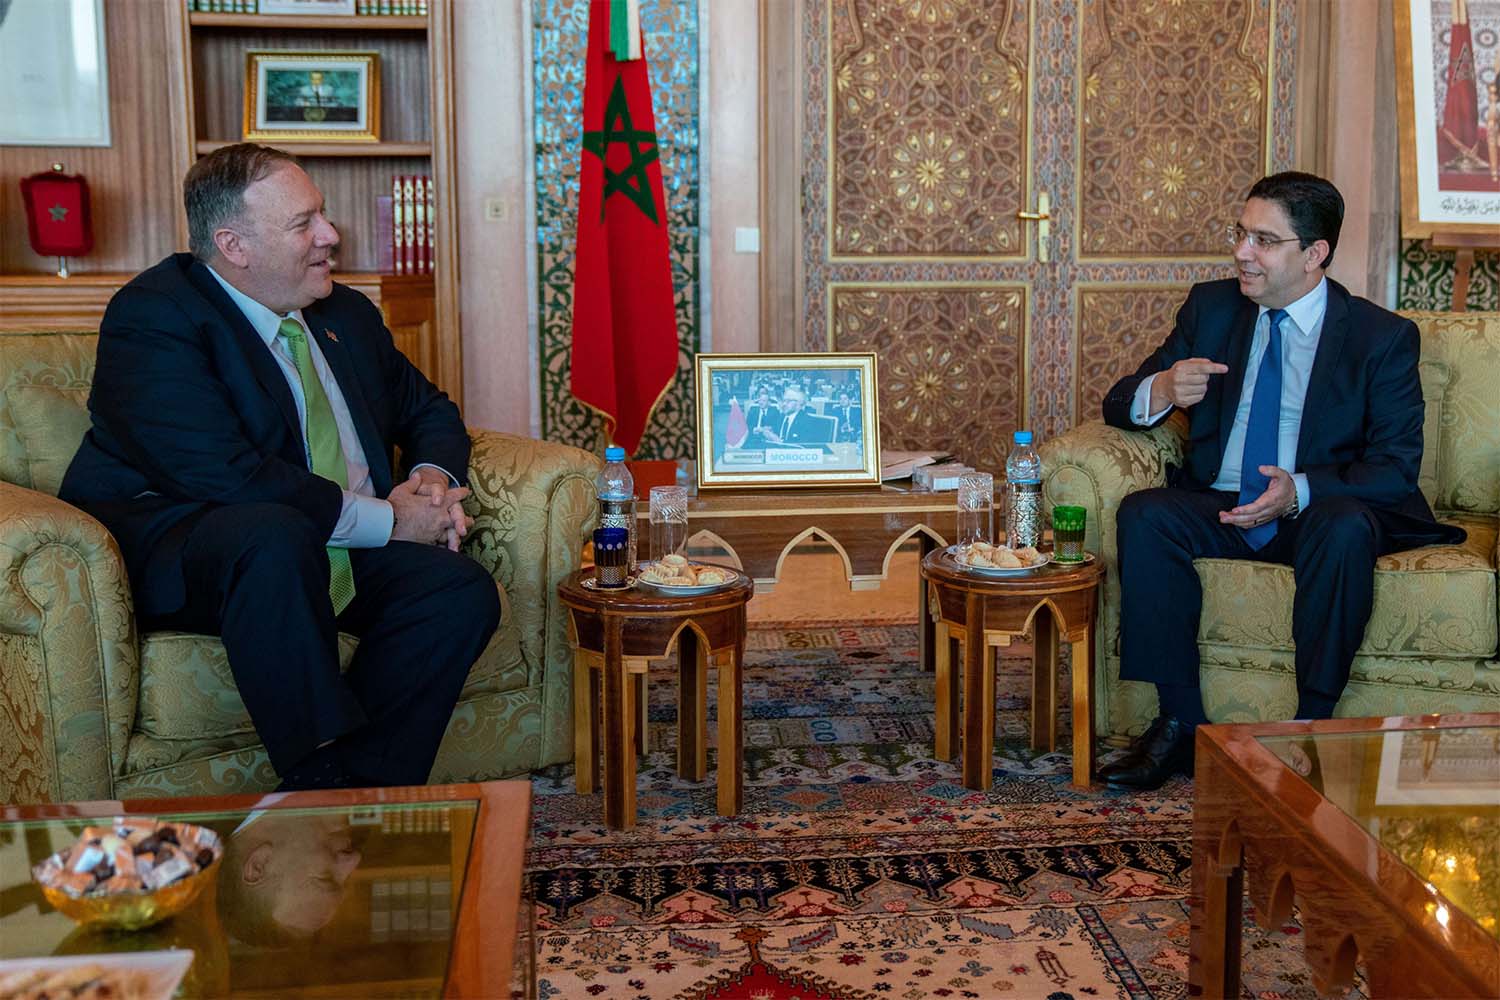 US Secretary of State Mike Pompeo (L) speaks with Moroccan Foreign Minister Nasser Bourita during their meeting